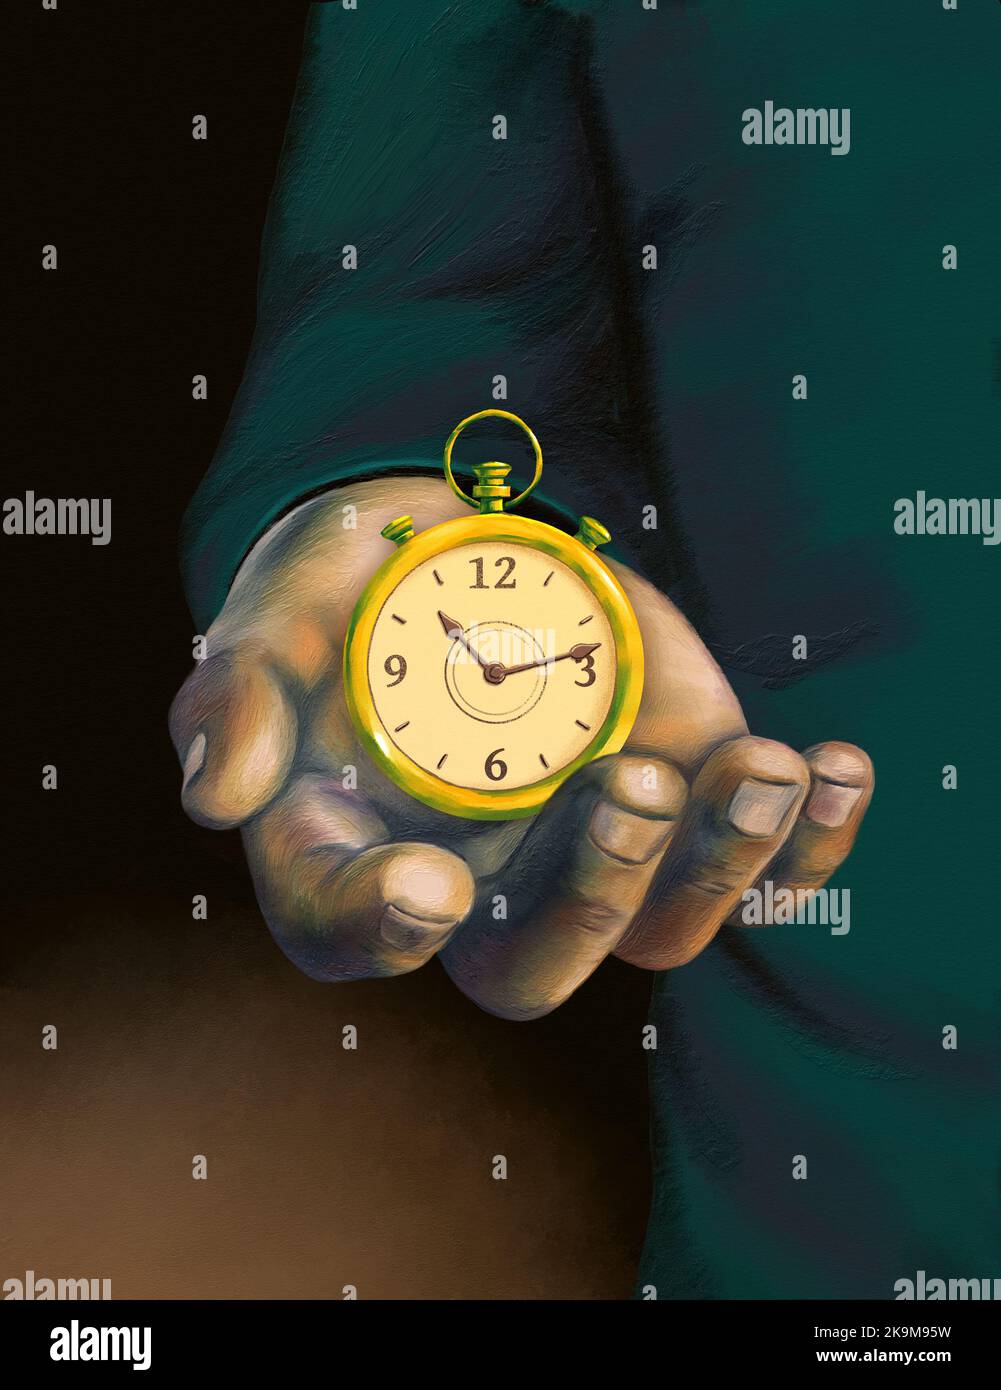 Open hand showing an old clock. Digital hand-painted illustration. Stock Photo